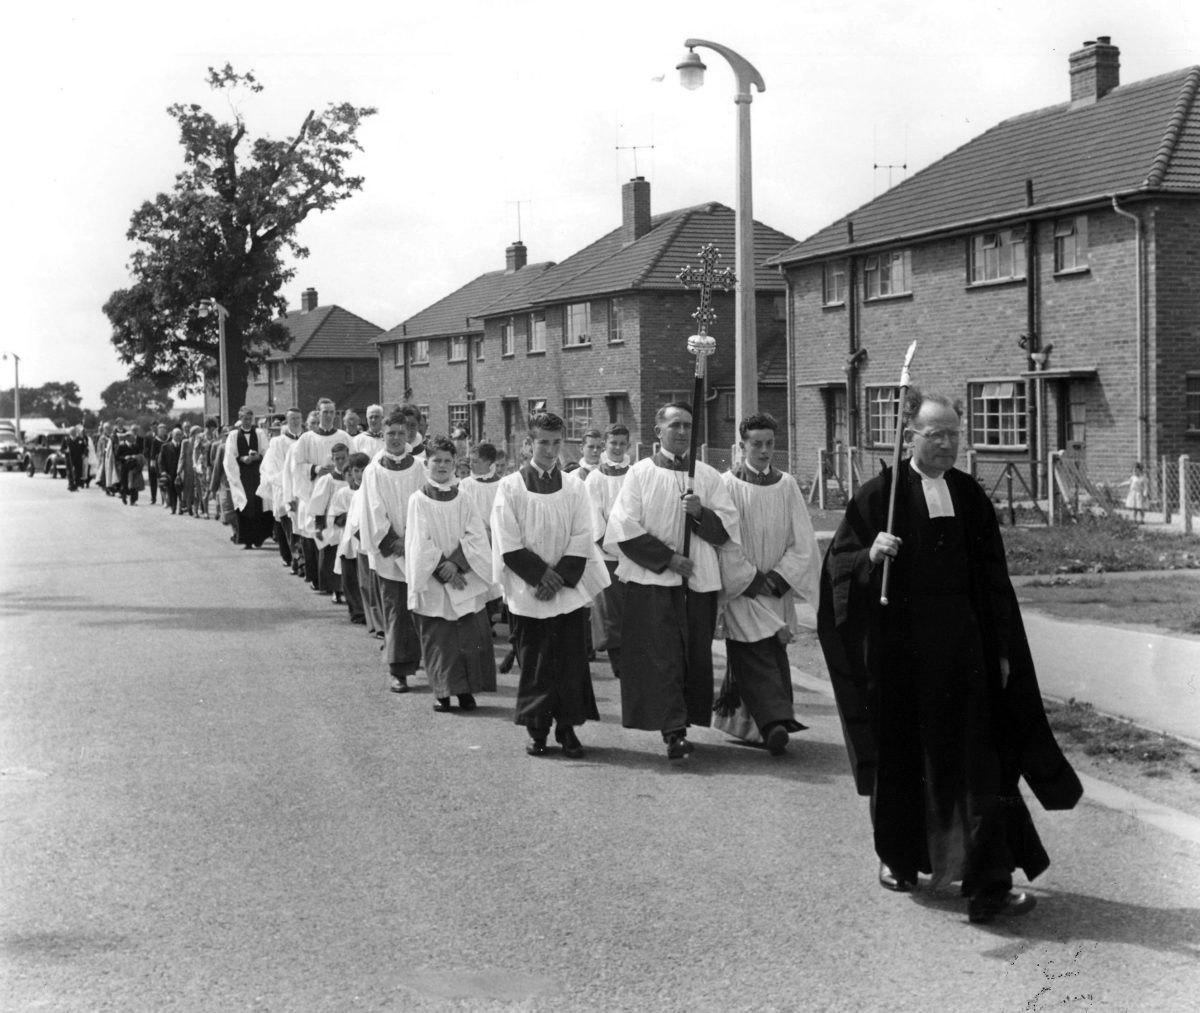 Marching along Harrowby Lane to open new church